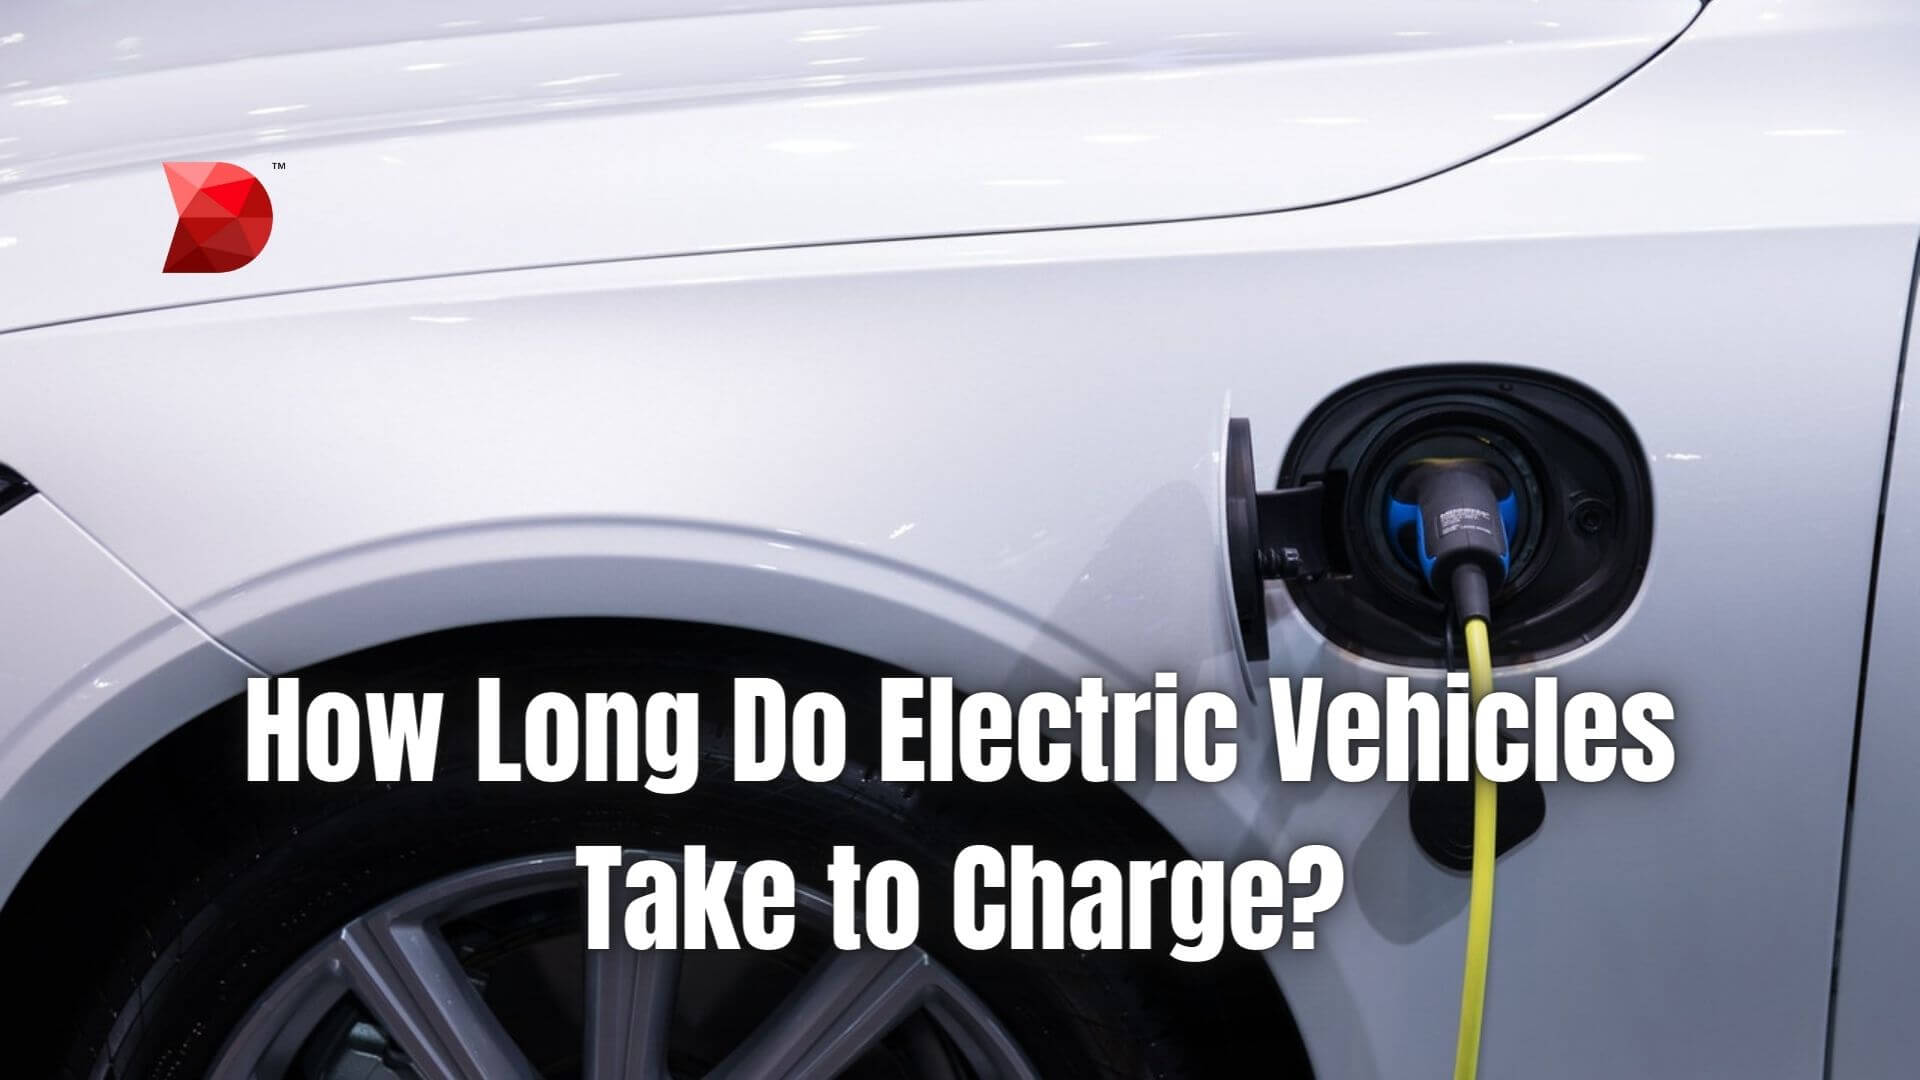 How Long Do Electric Vehicles Take to Charge